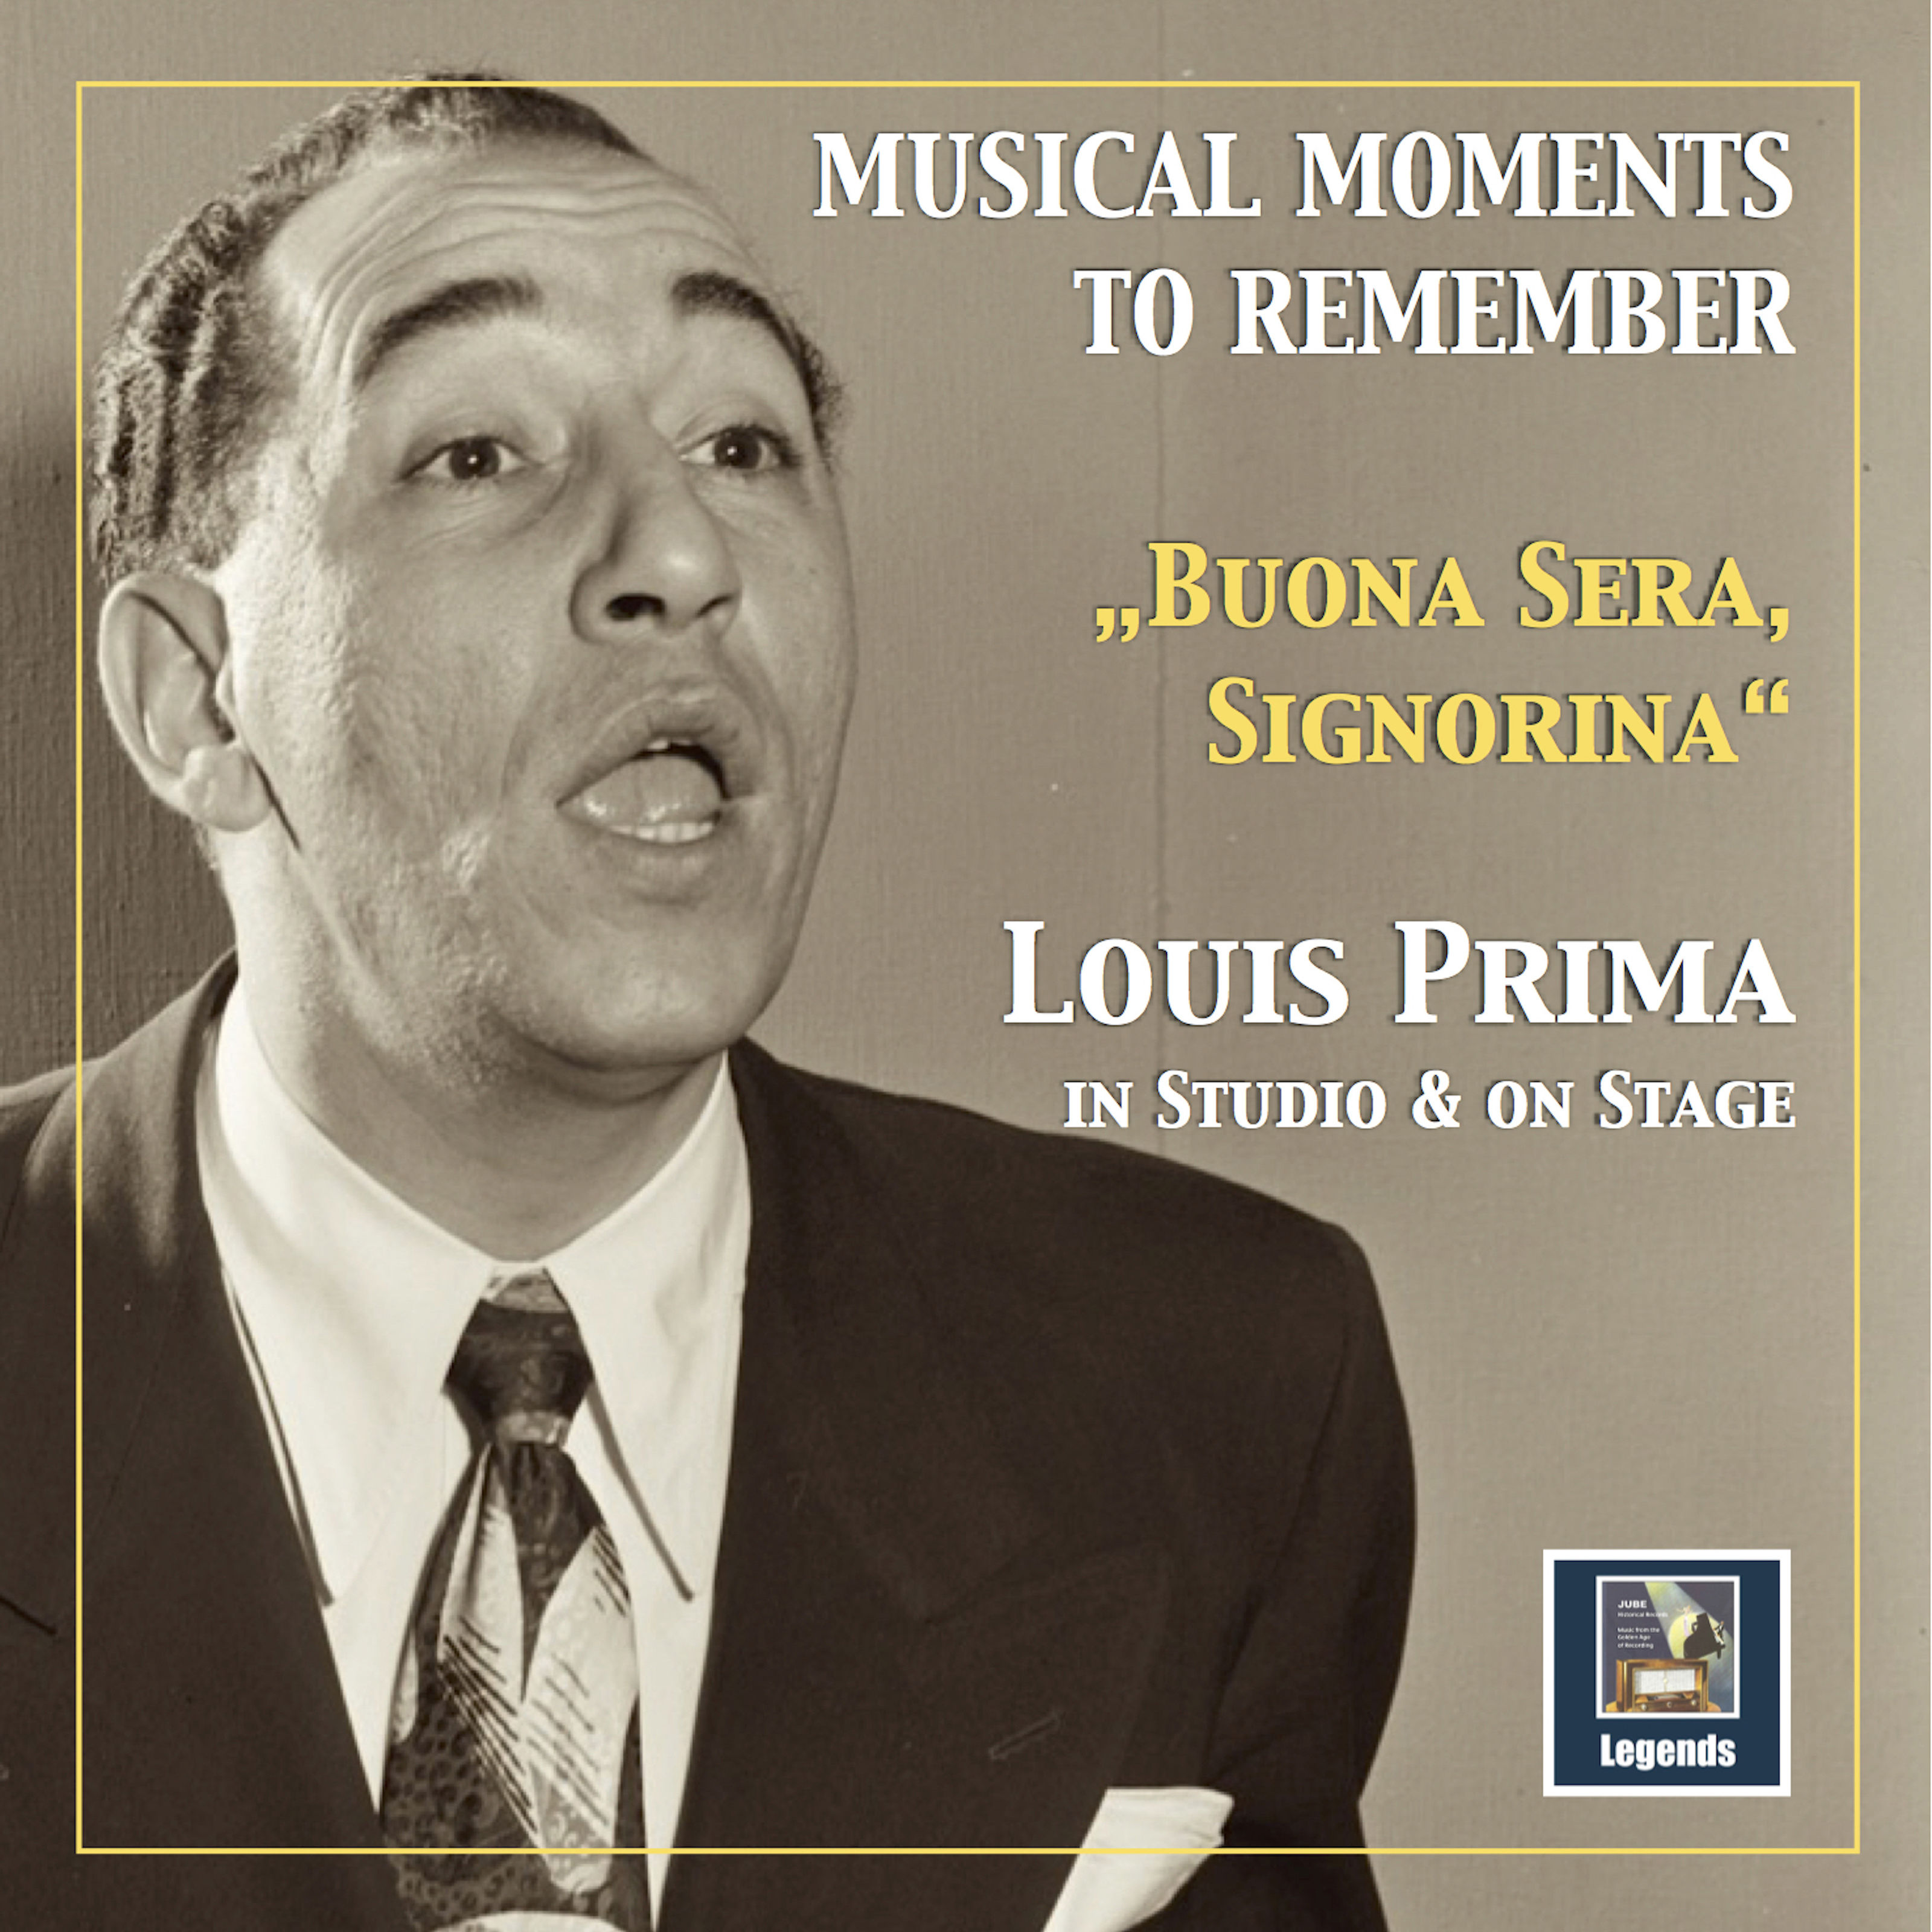 Louis Prima - Musical Moments To Remember (2018) [FLAC 24bit/48kHz]